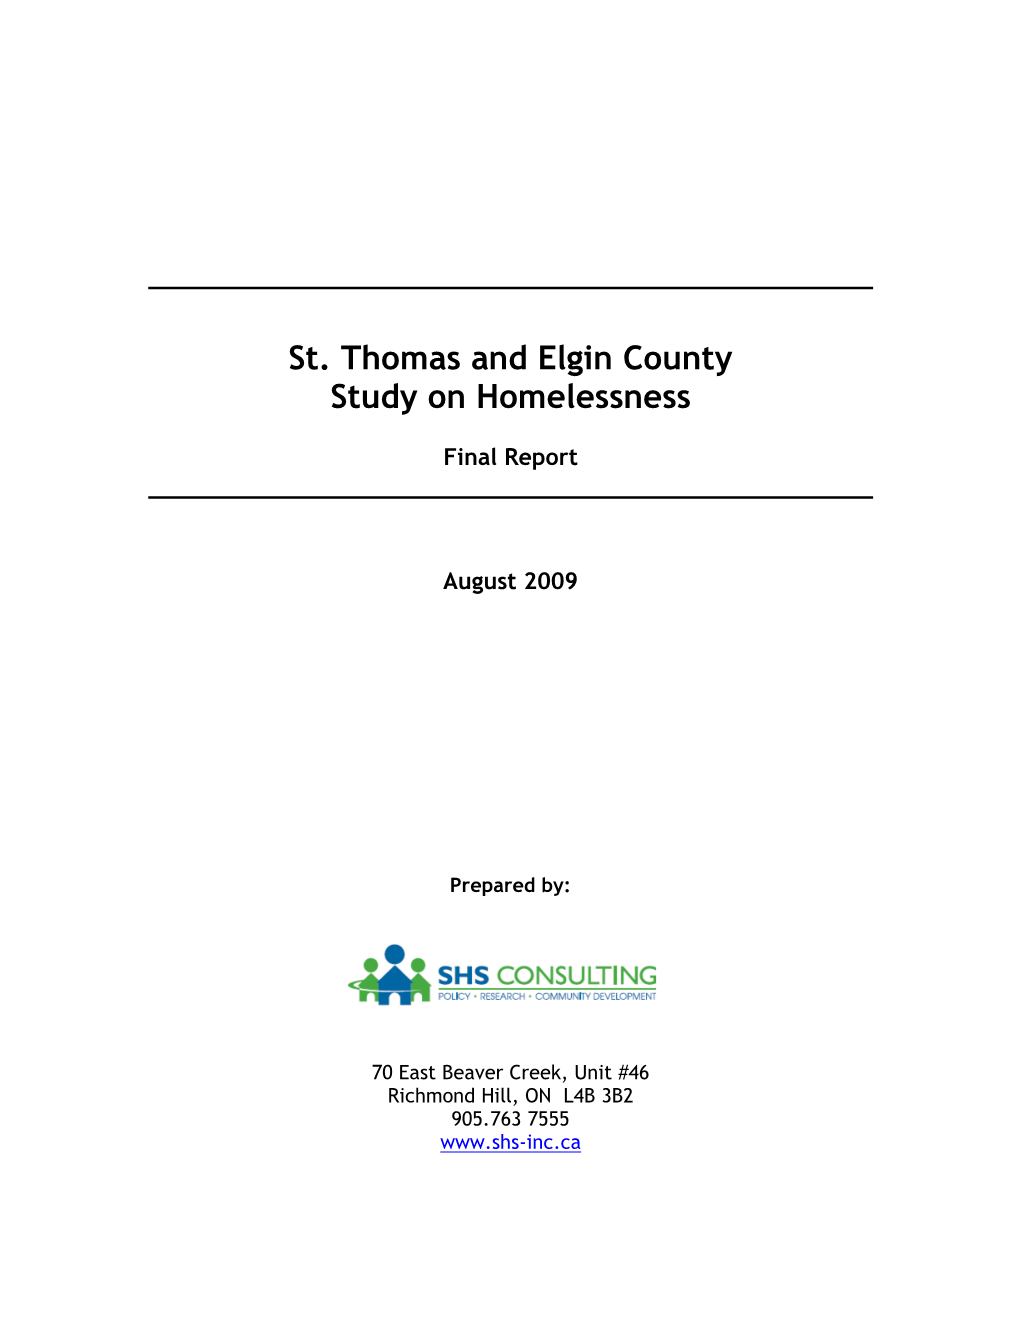 St. Thomas and Elgin County Study on Homelessness